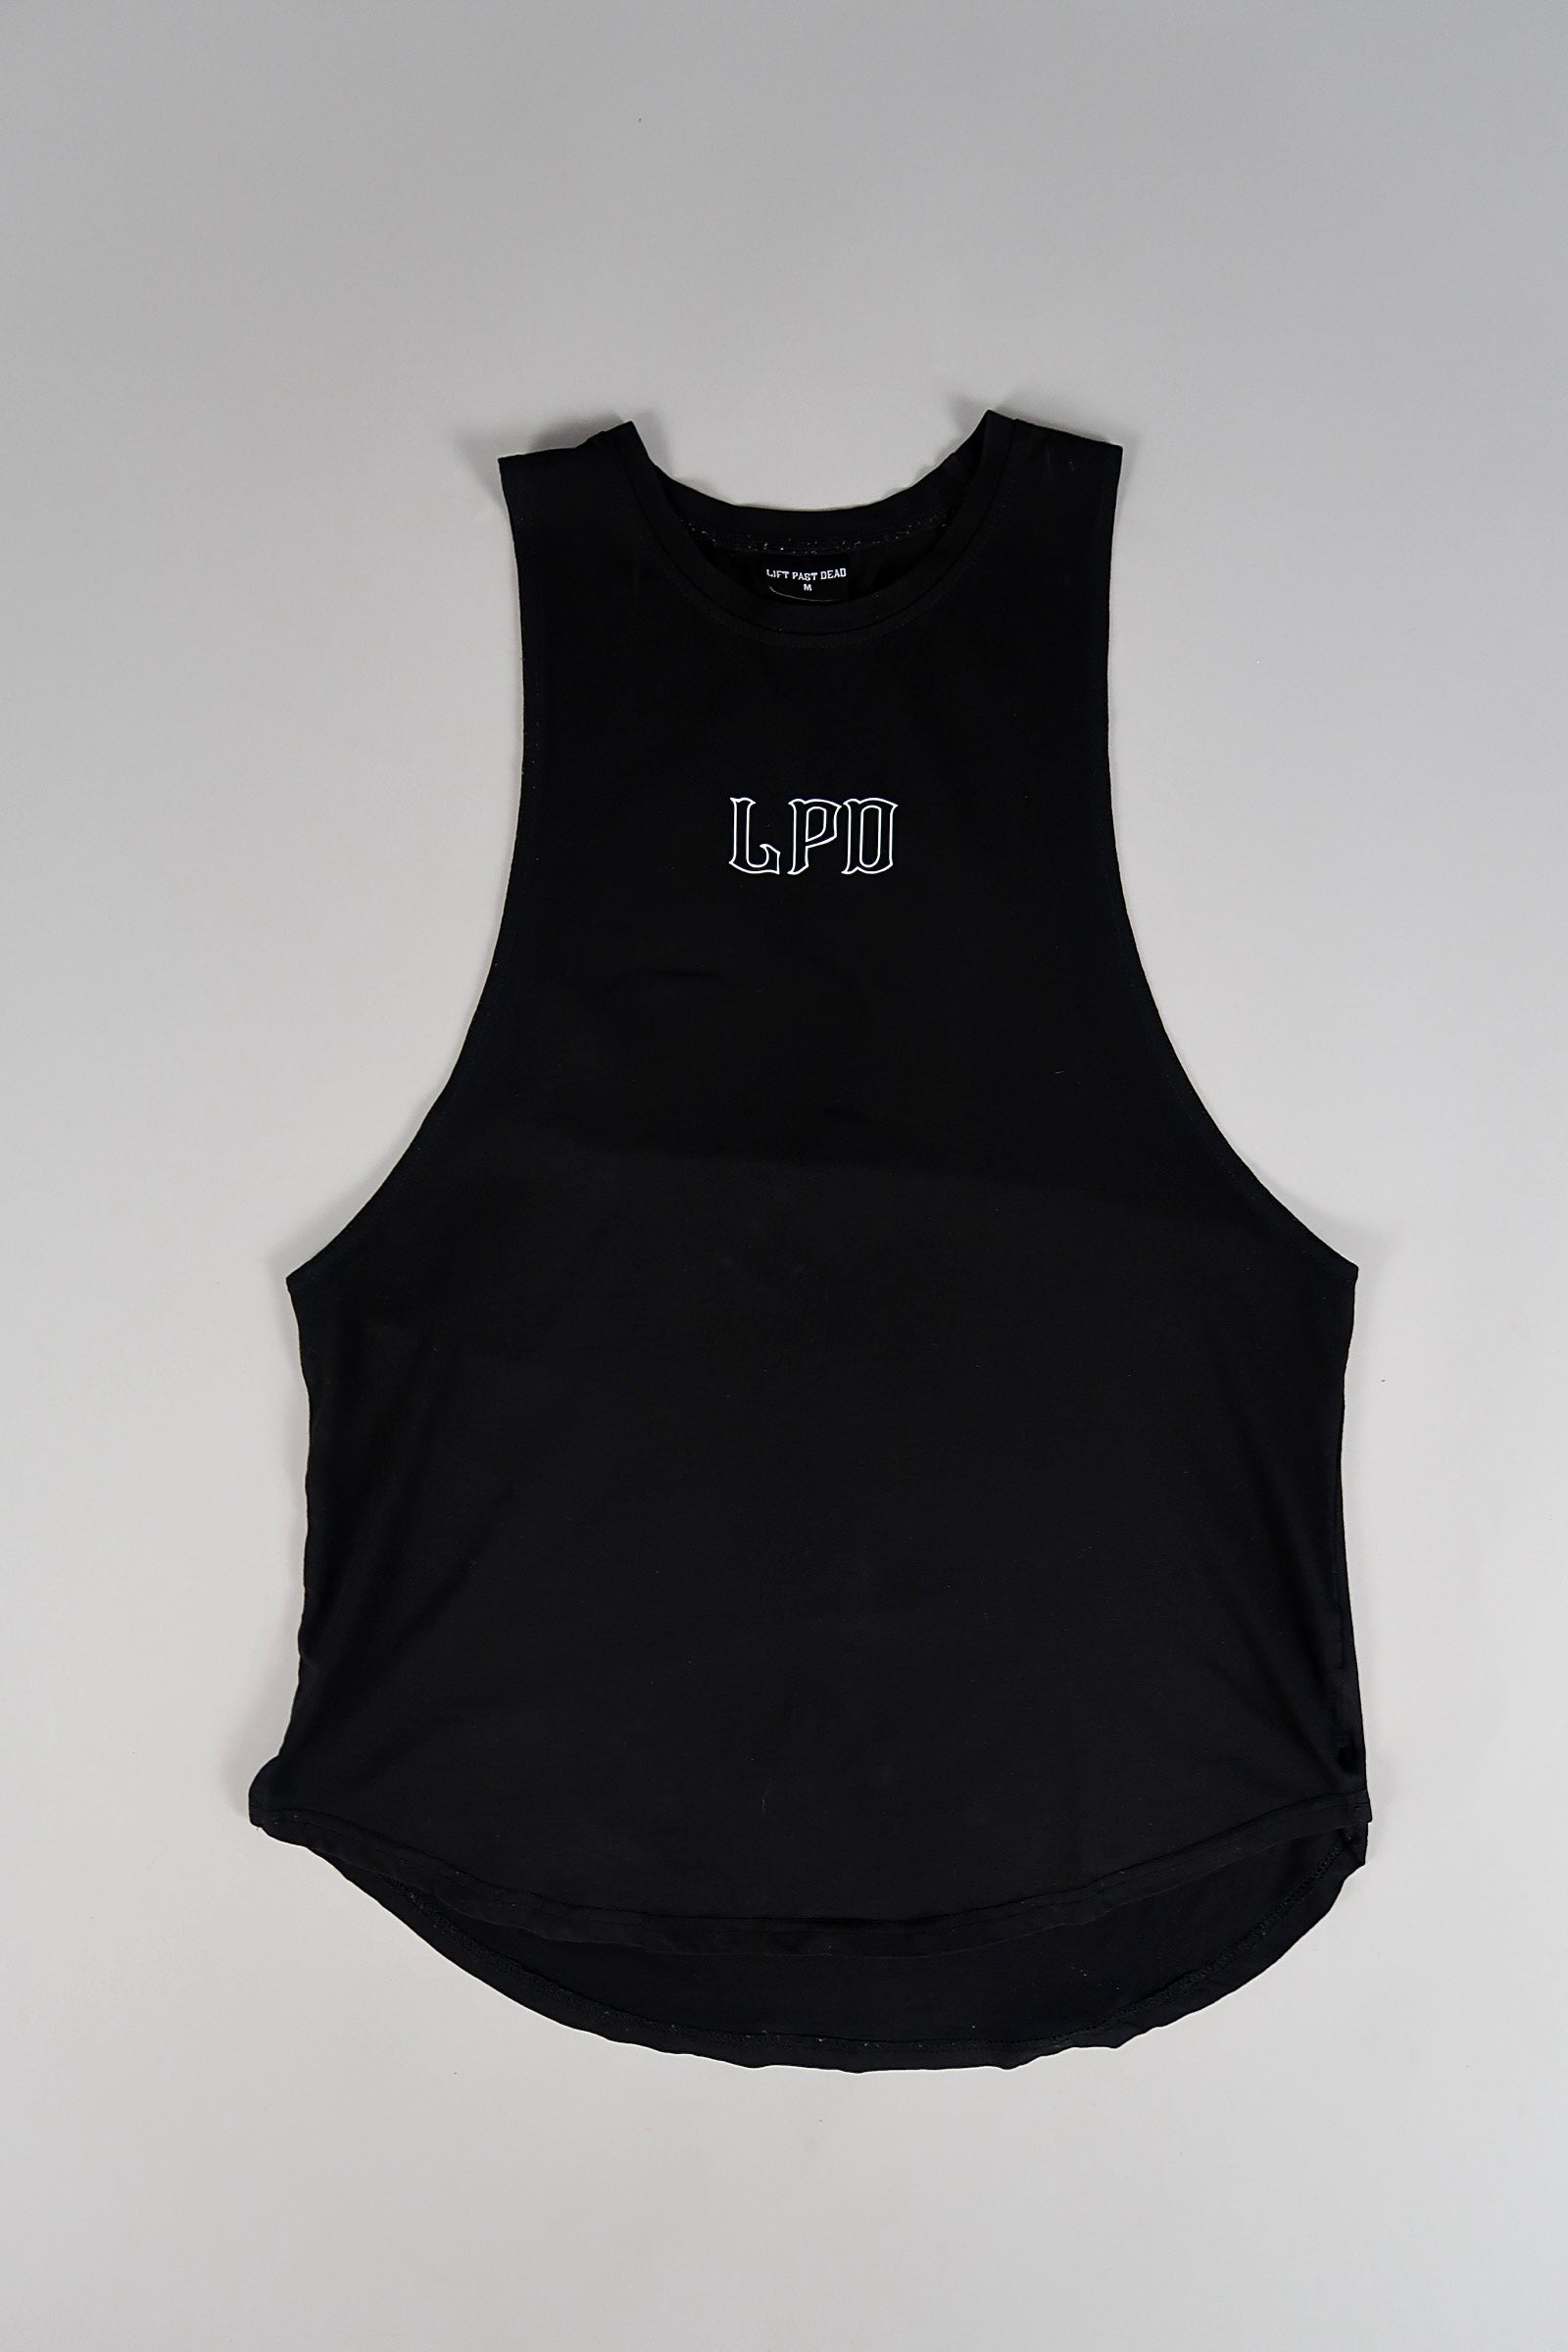 Lift as you Are Tank Top – Lifting the Dream